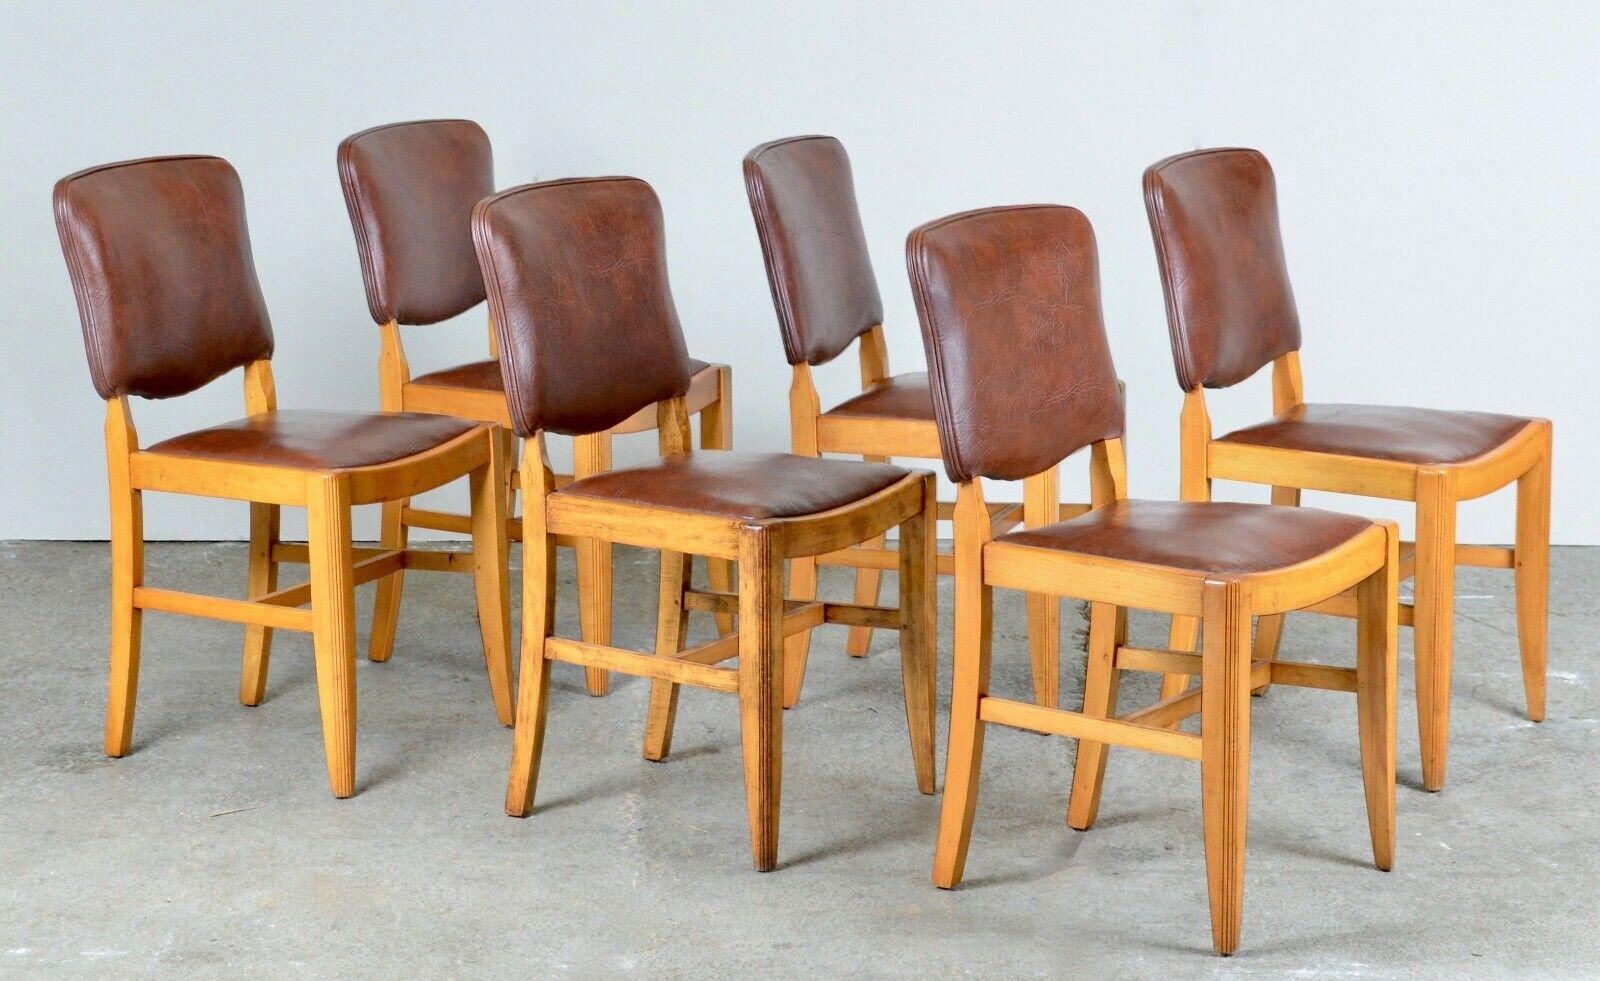 We are delighted to offer for sale this vintage suite of six brown leather and walnut dining chairs. These chairs are in very good condition, the backs and seats are comfortable and an attractive set for any dining room.

DIMENSIONS 

Height :